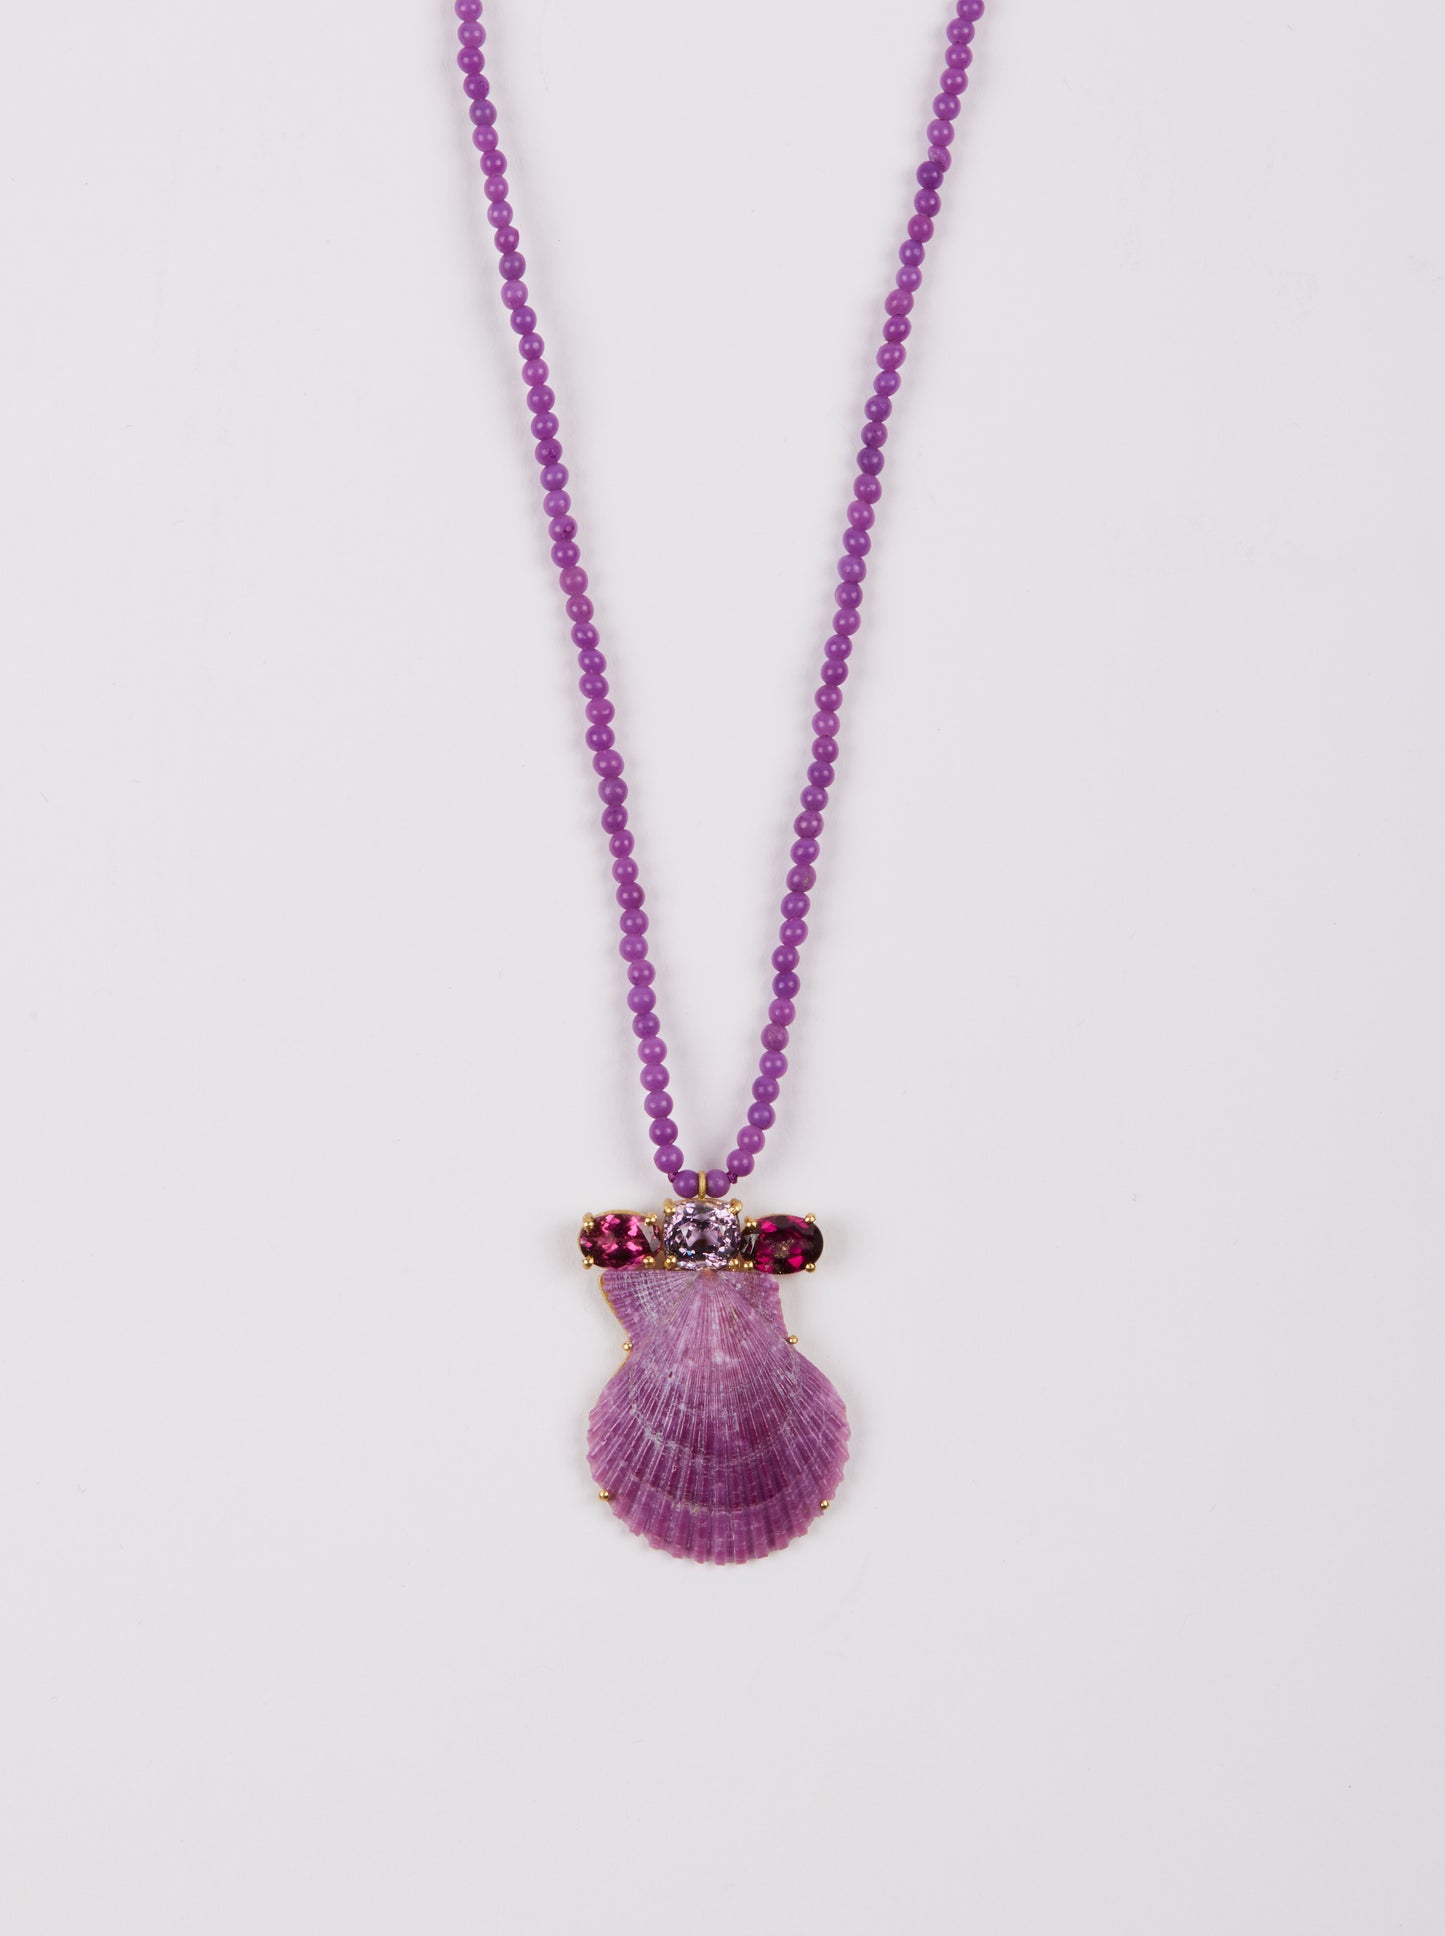 Phosphiderate with Garnets and Sapphire with Purple Shell